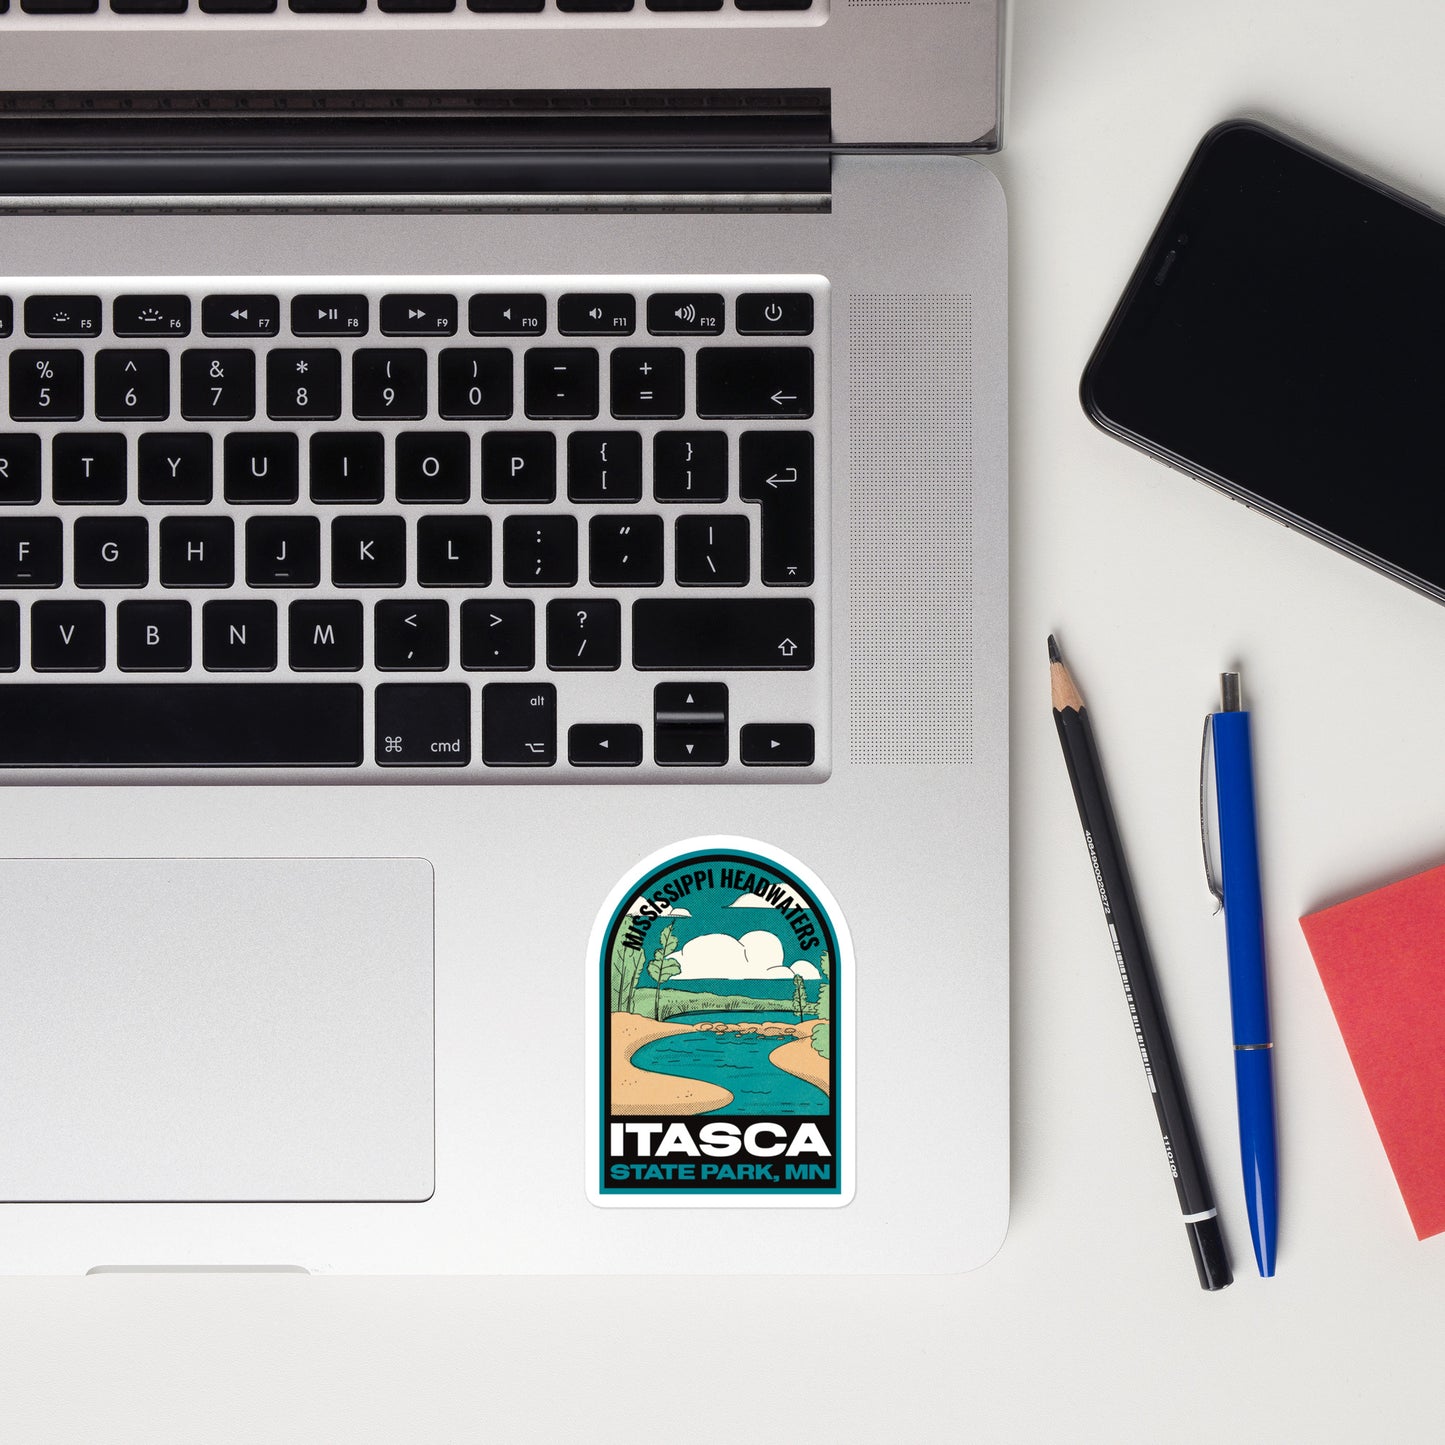 A sticker of Itasca State Park on a laptop